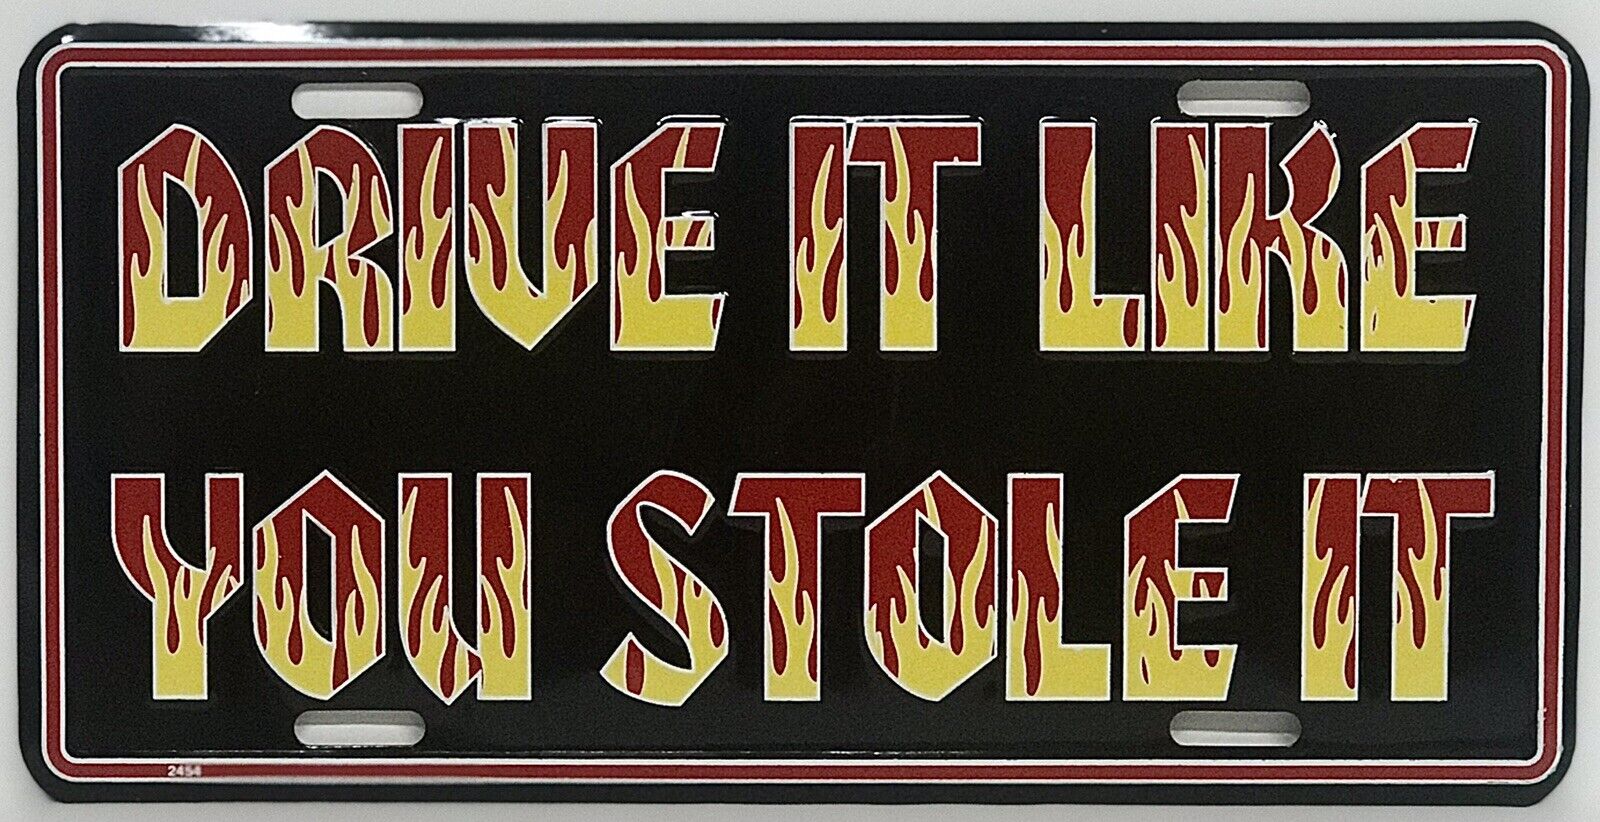 Drive It Like You Stole It License Plate Aluminum Metal 12”x 6” Red Black Yellow